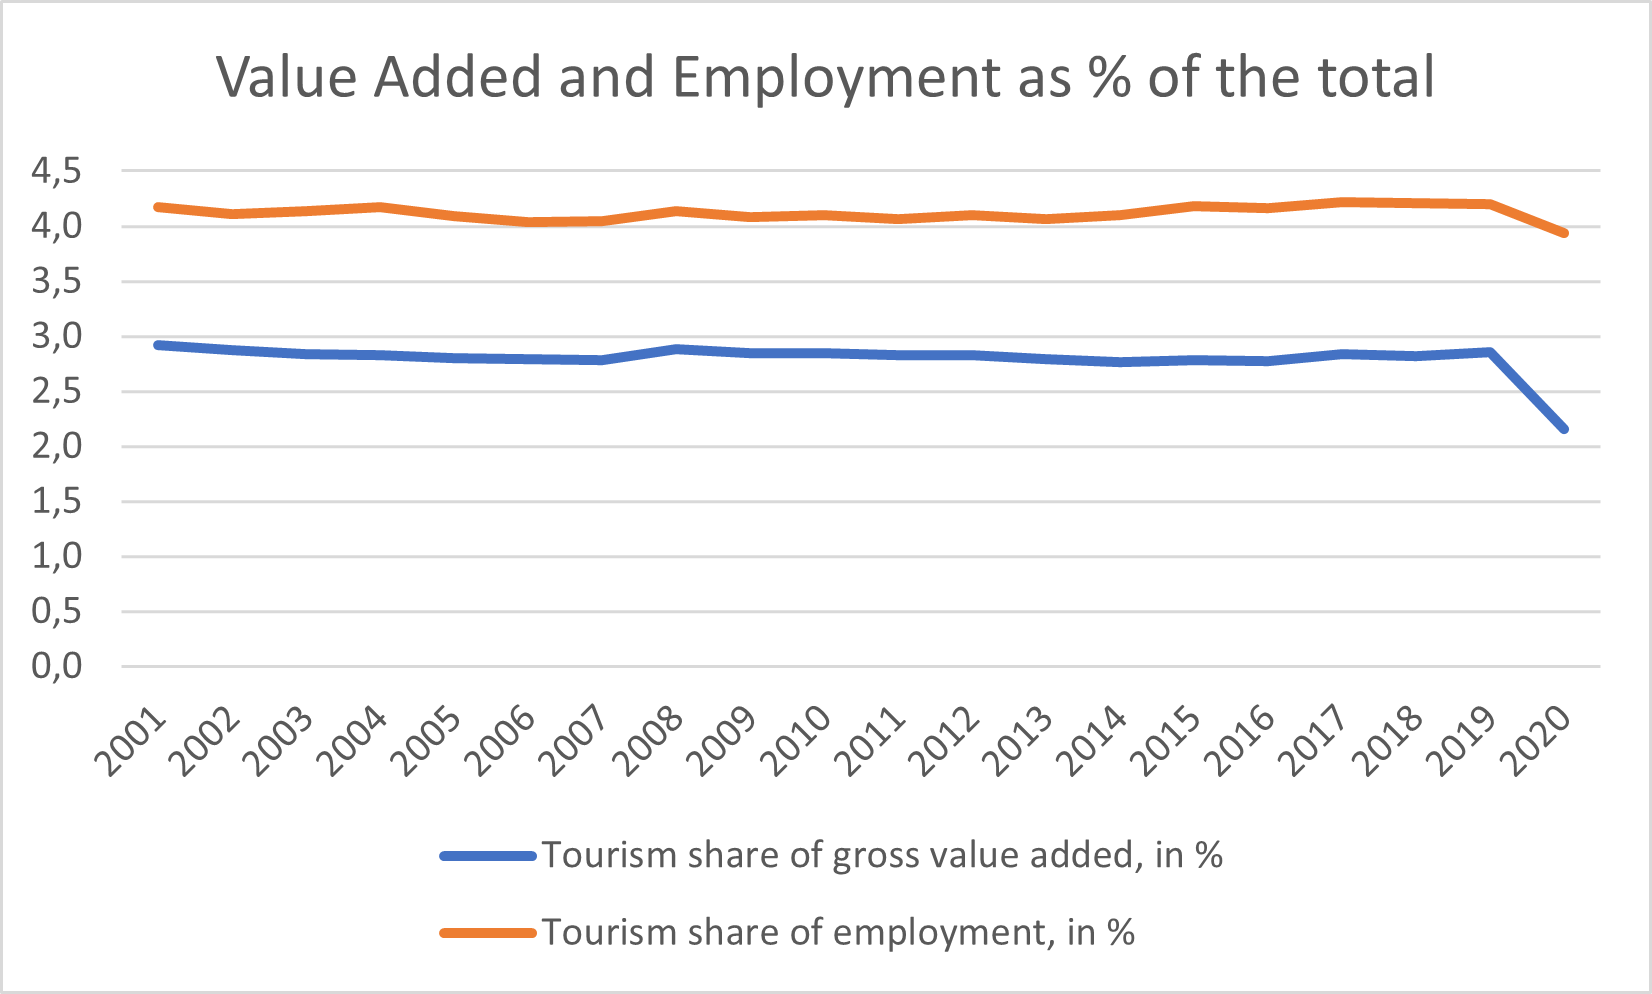 Table 7 - Value Added and Employment as % of the total